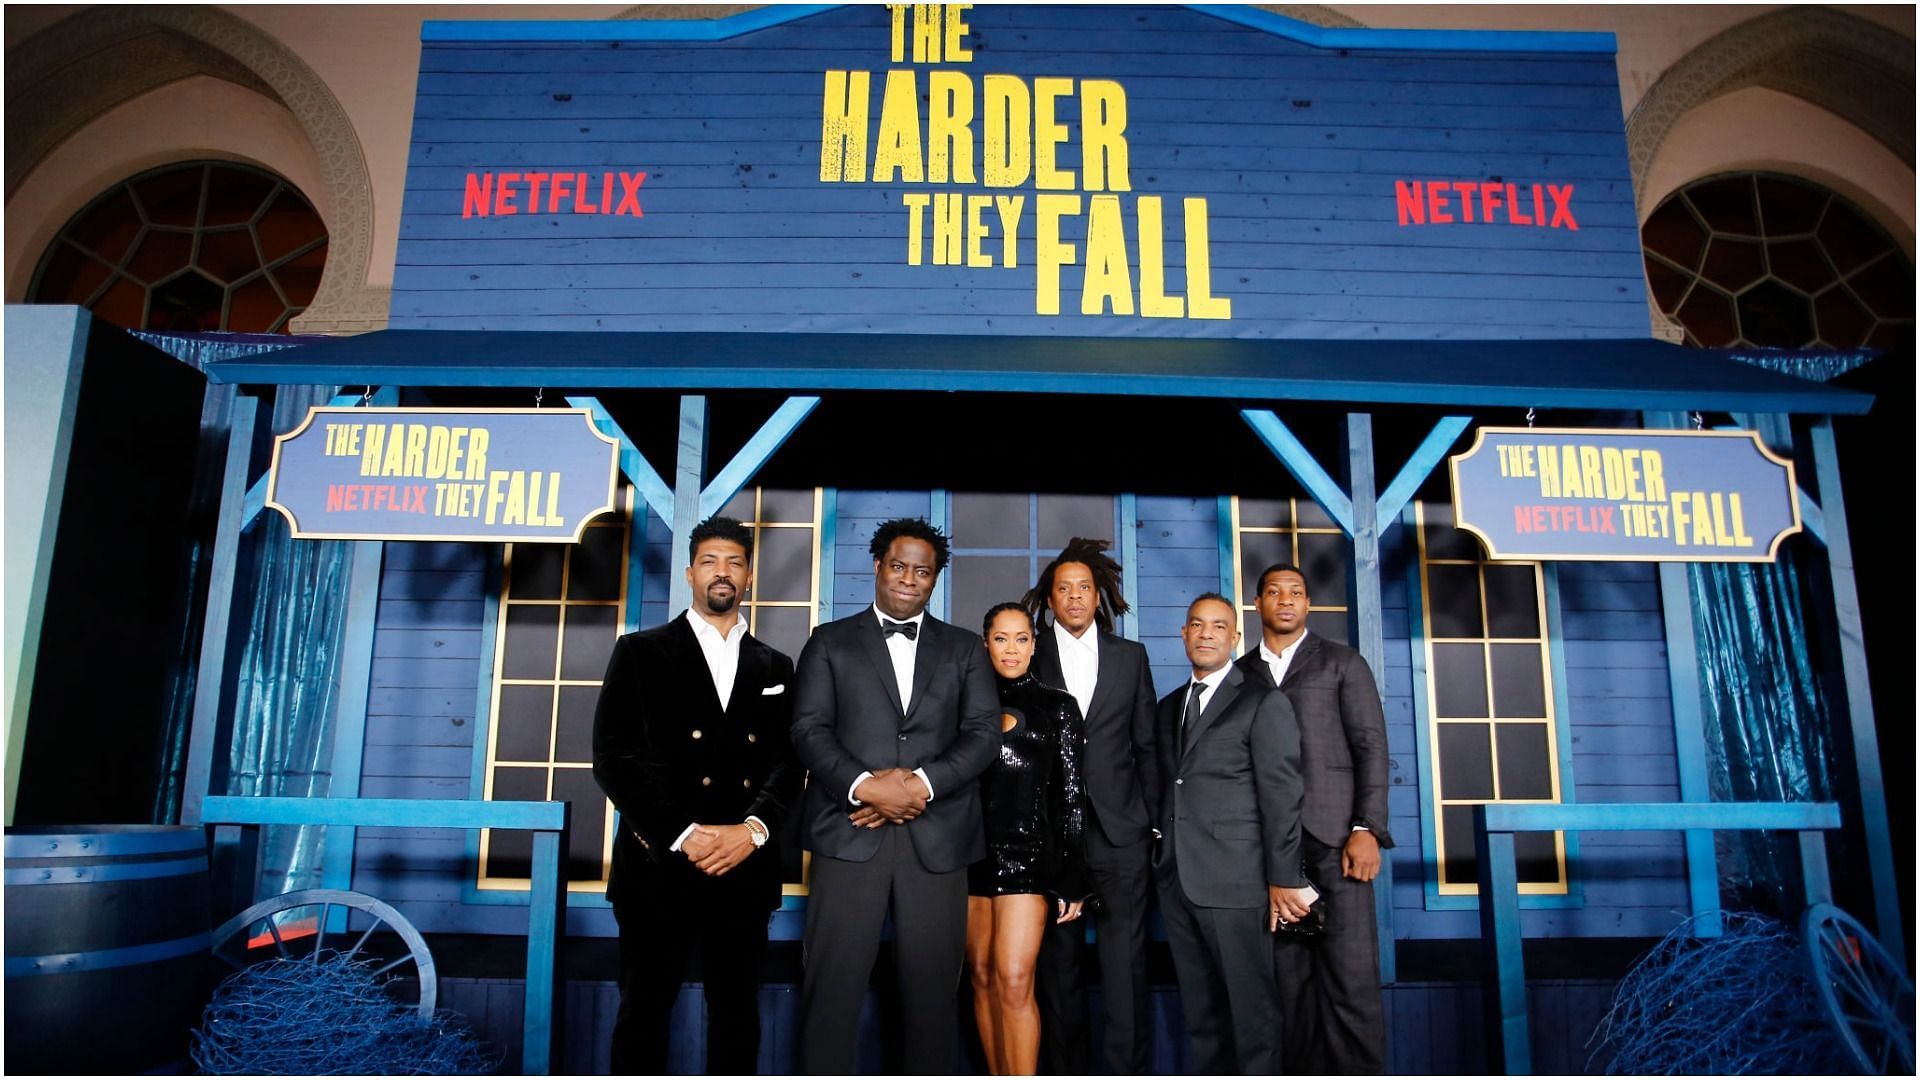 Deon Cole, Jeymes Samuel, Regina King Jay-Z, James Lassiter and Jonathan Majors attend a special screening of &ldquo;The Harder They Fall&rdquo; at the Shrine Auditorium and Expo Hall on October 13, 2021 in Los Angeles, California (Image via Getty Images)